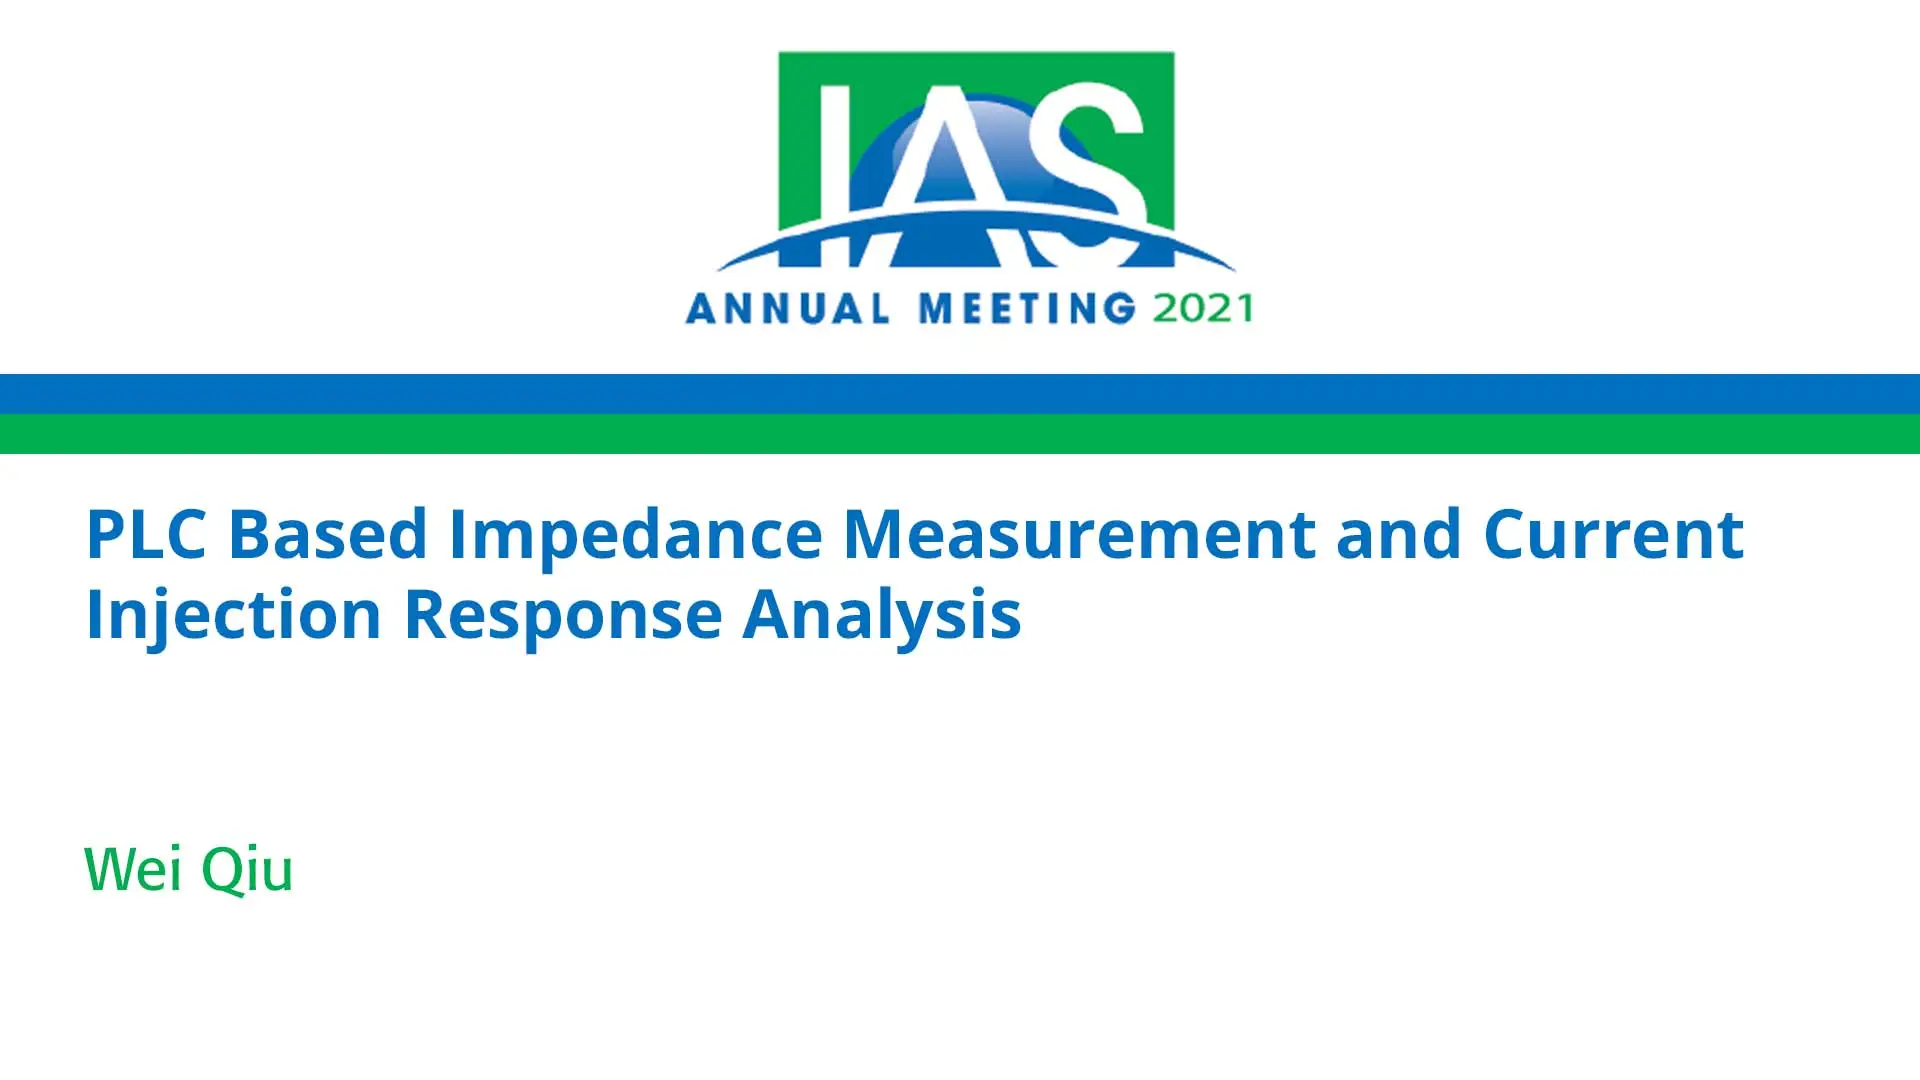 PLC Based Impedance Measurement and Current Injection Response Analysis